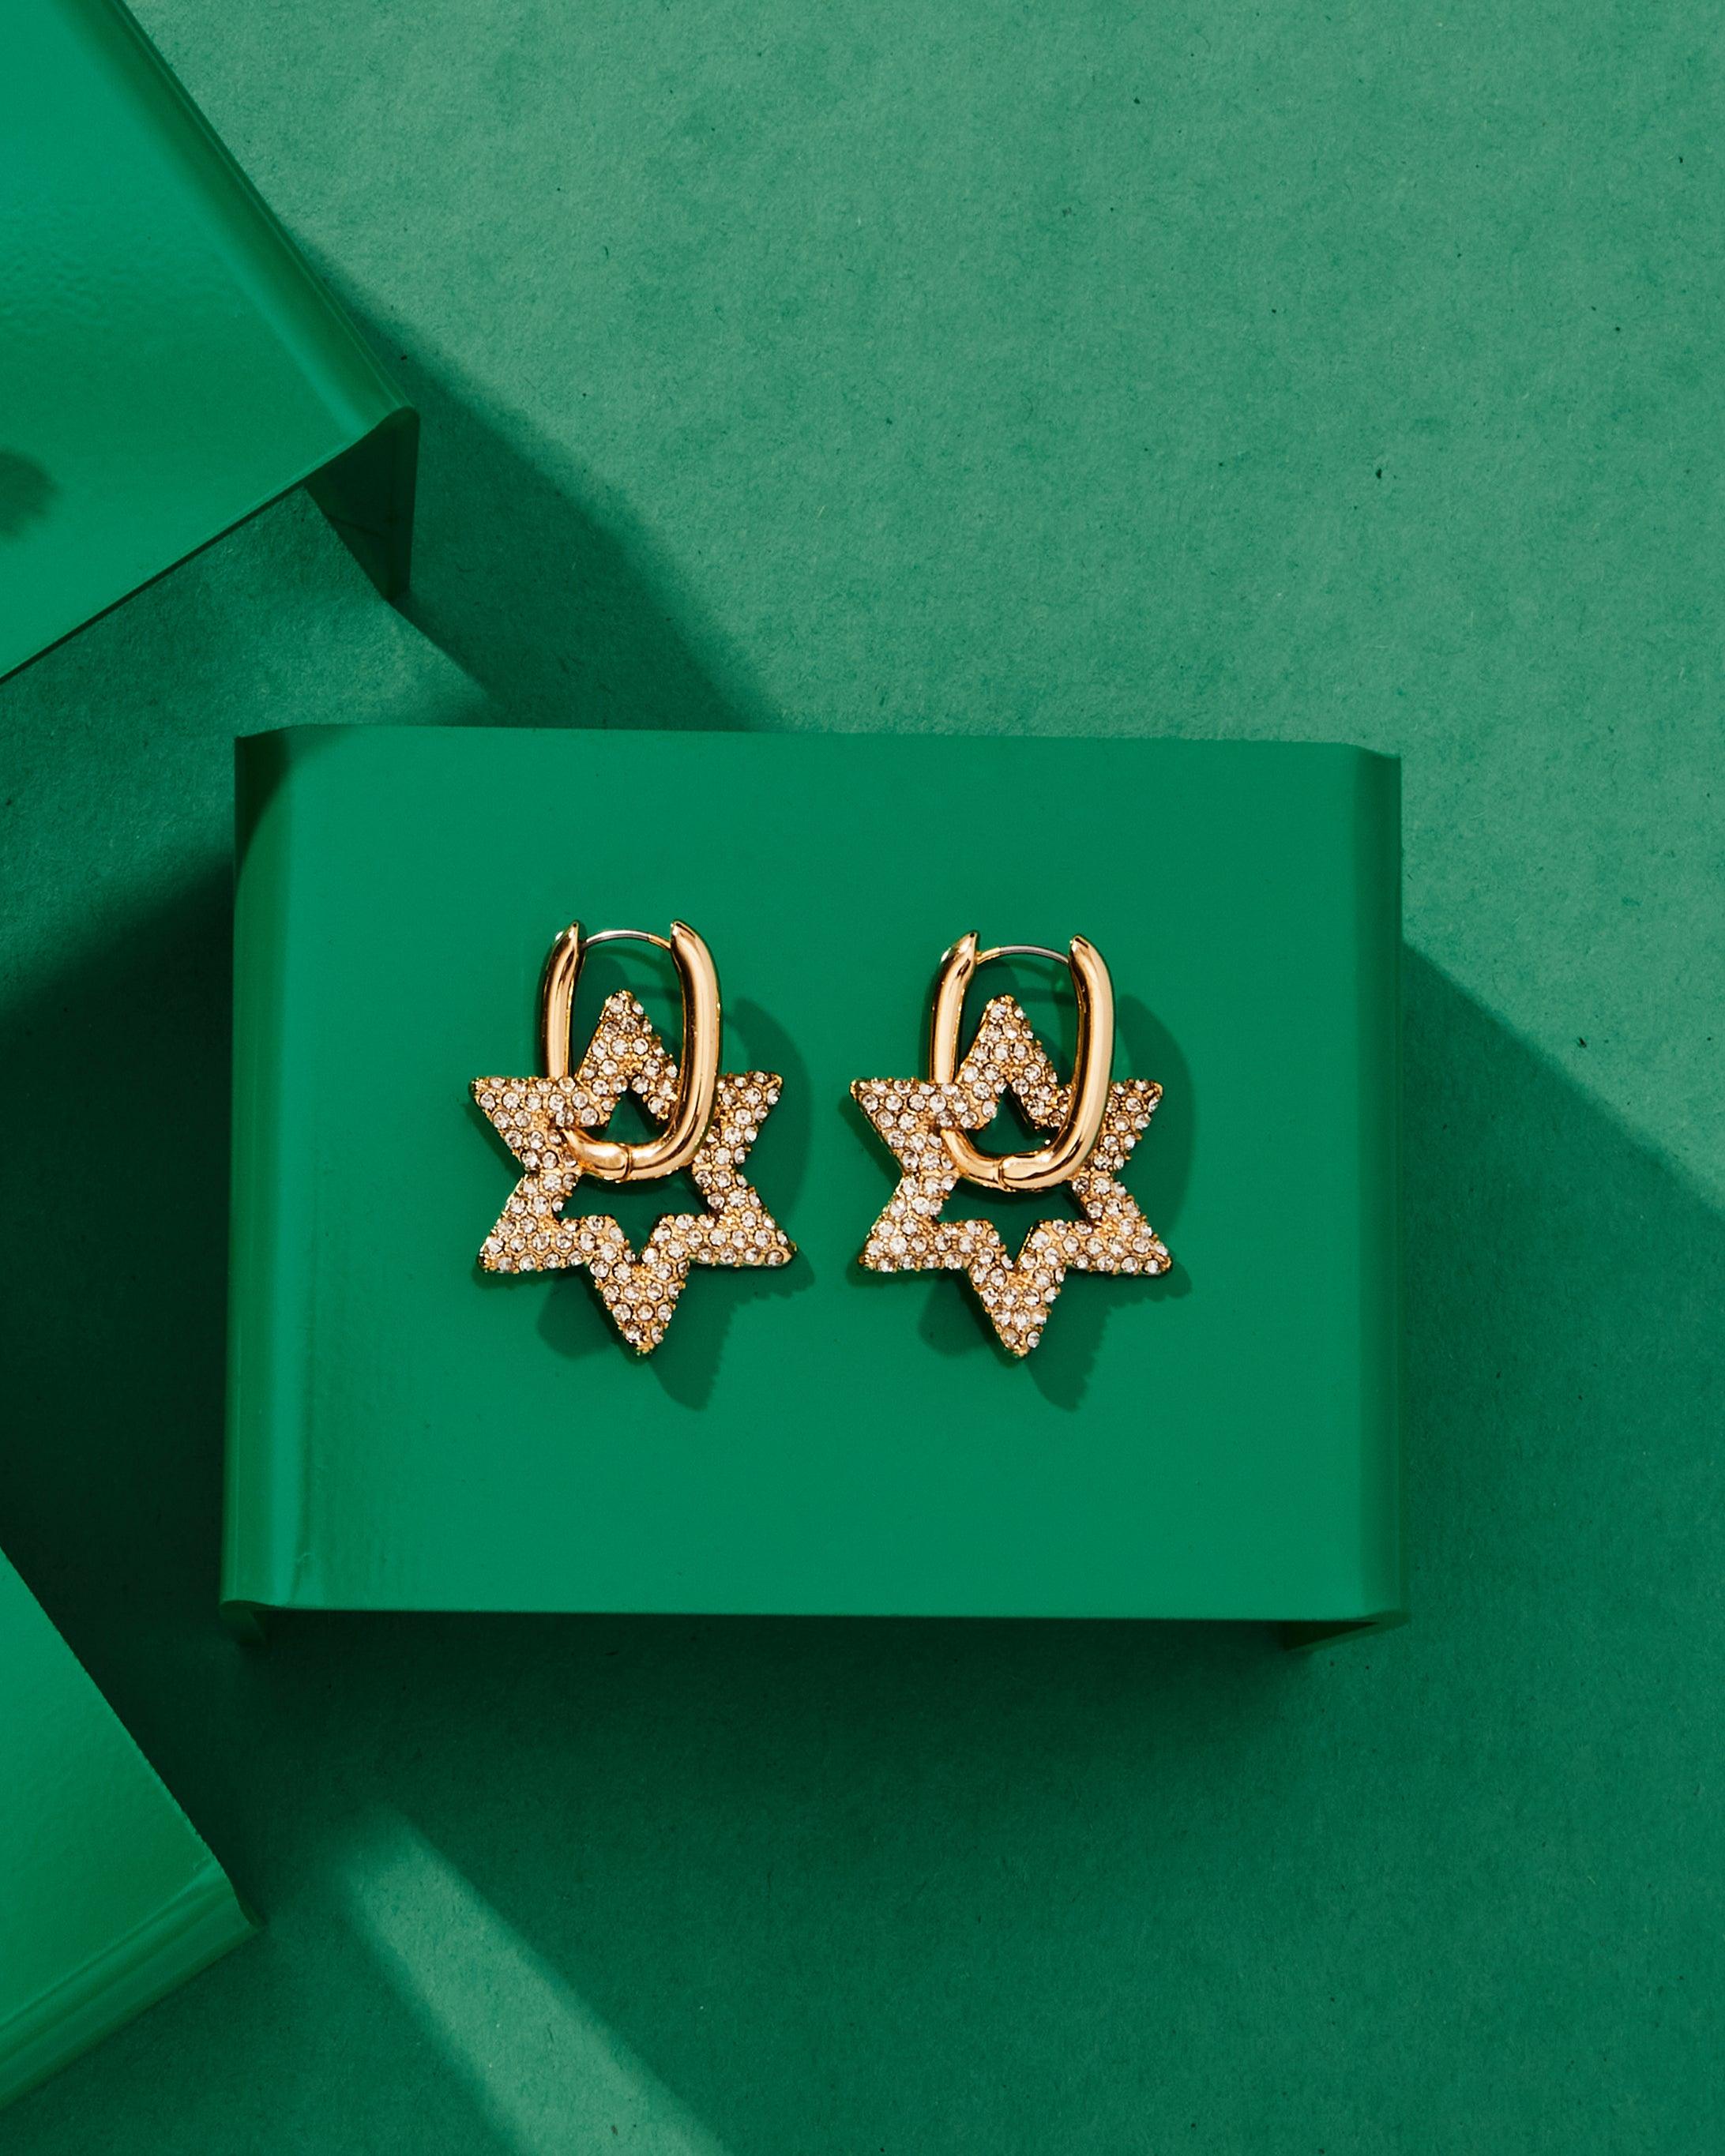 PAVED WITH STARS EARRINGS - 8 Other Reasons